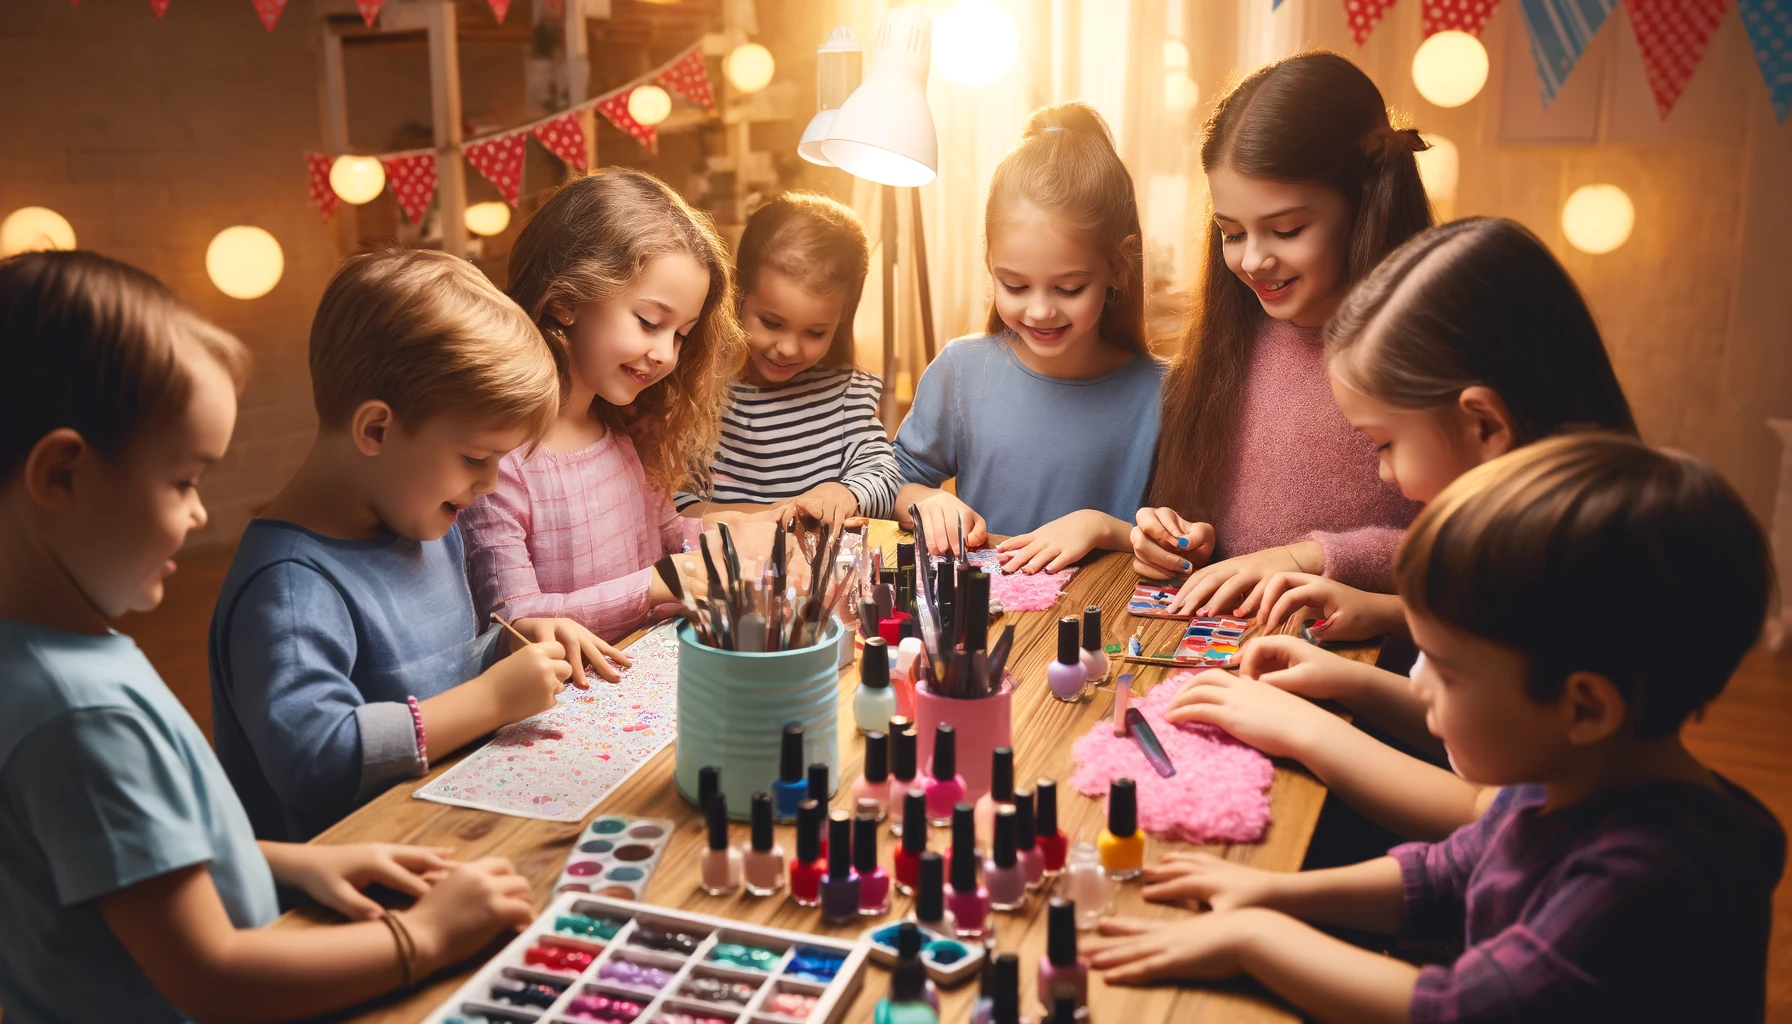 Creative Nail Art Session for Children Nail Art for Kids: 10 Safe and Fun Designs for Little Hands - 4 Pouted Lifestyle Magazine